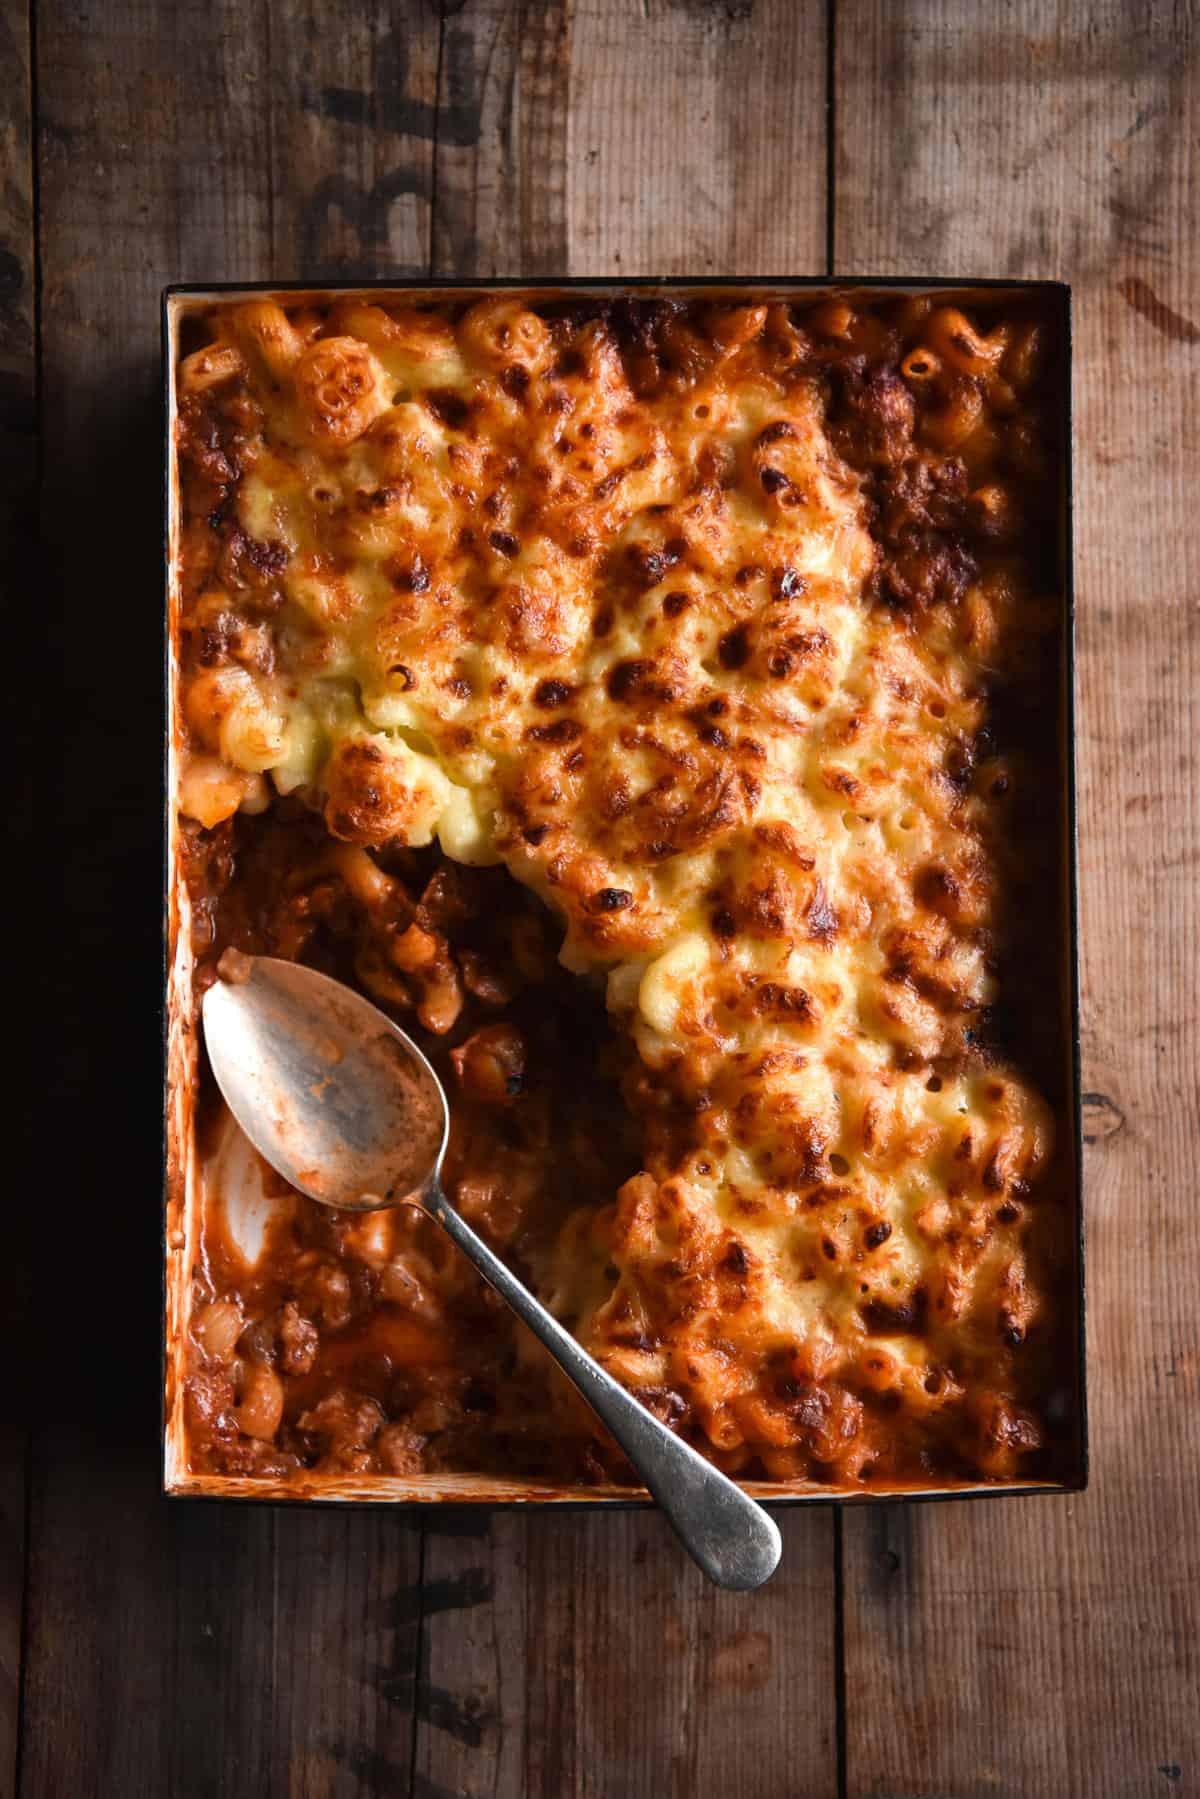 An aerial image of a vegetarian bolognese mac and cheese bake on a wooden table. A big spoonful of the bake has been removed and a vintage silver spoon sits in it's place.